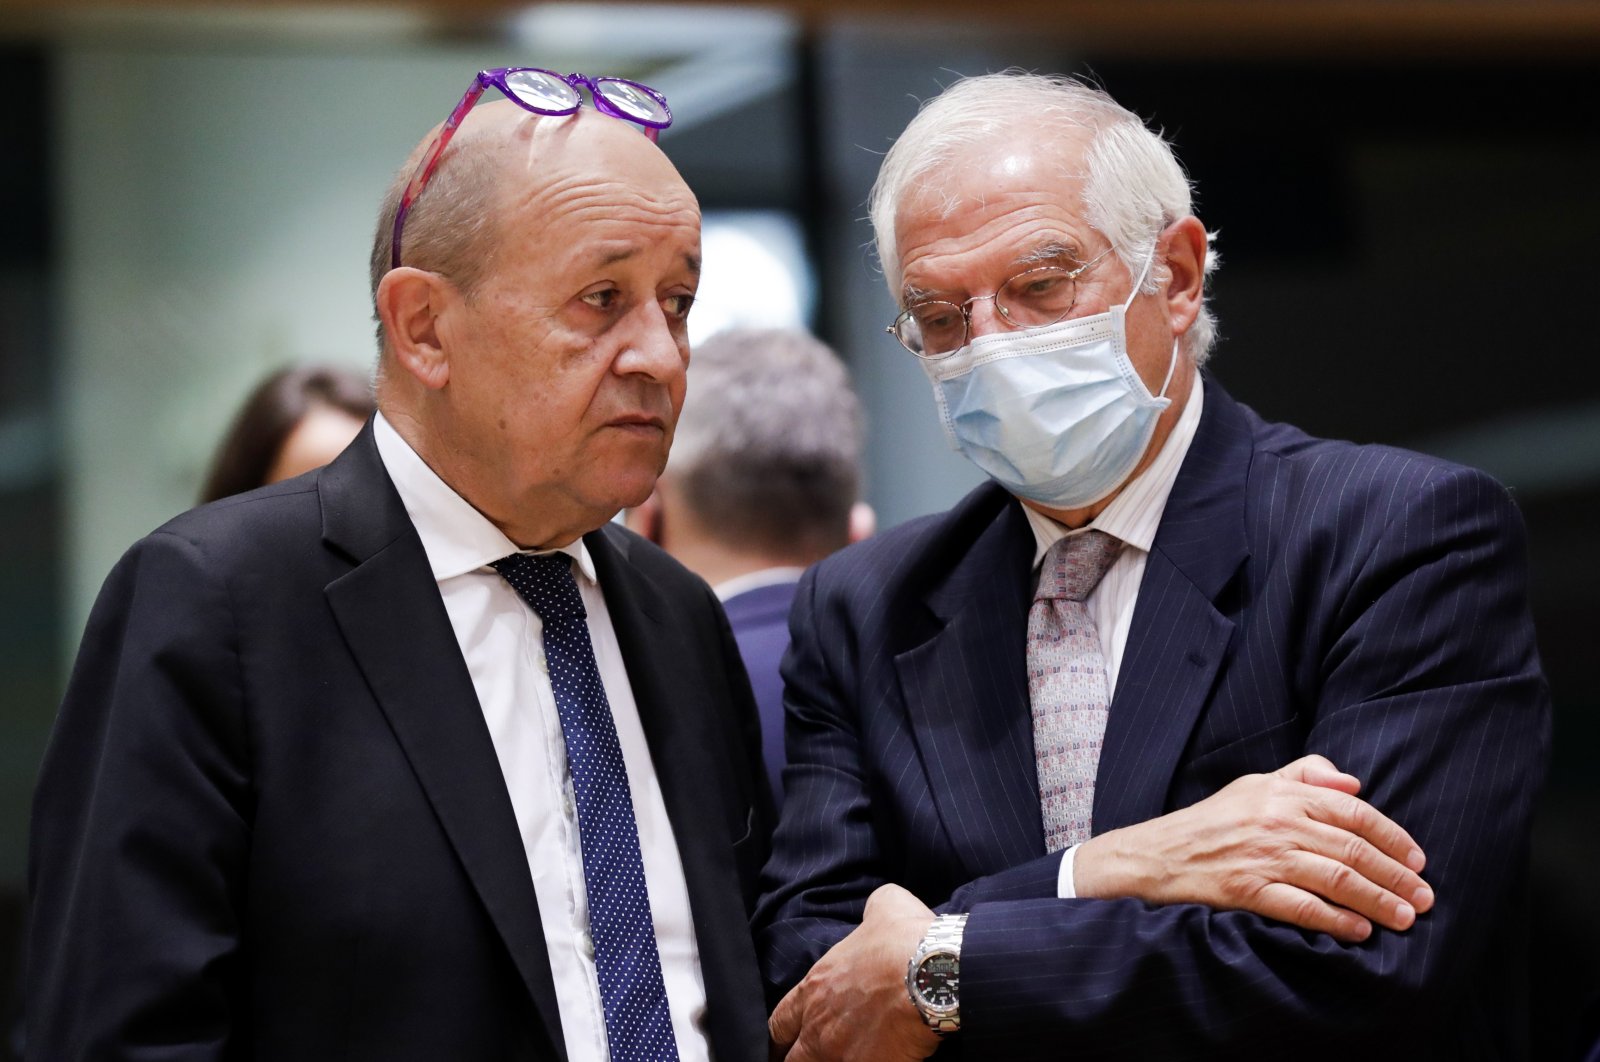 French Foreign Minister Jean-Yves Le Drian (L) speaks with European Union foreign policy chief Josep Borrell during a meeting of EU foreign affairs ministers at the European Council building in Brussels, Belgium, Sept. 21, 2020. (AP Photo)